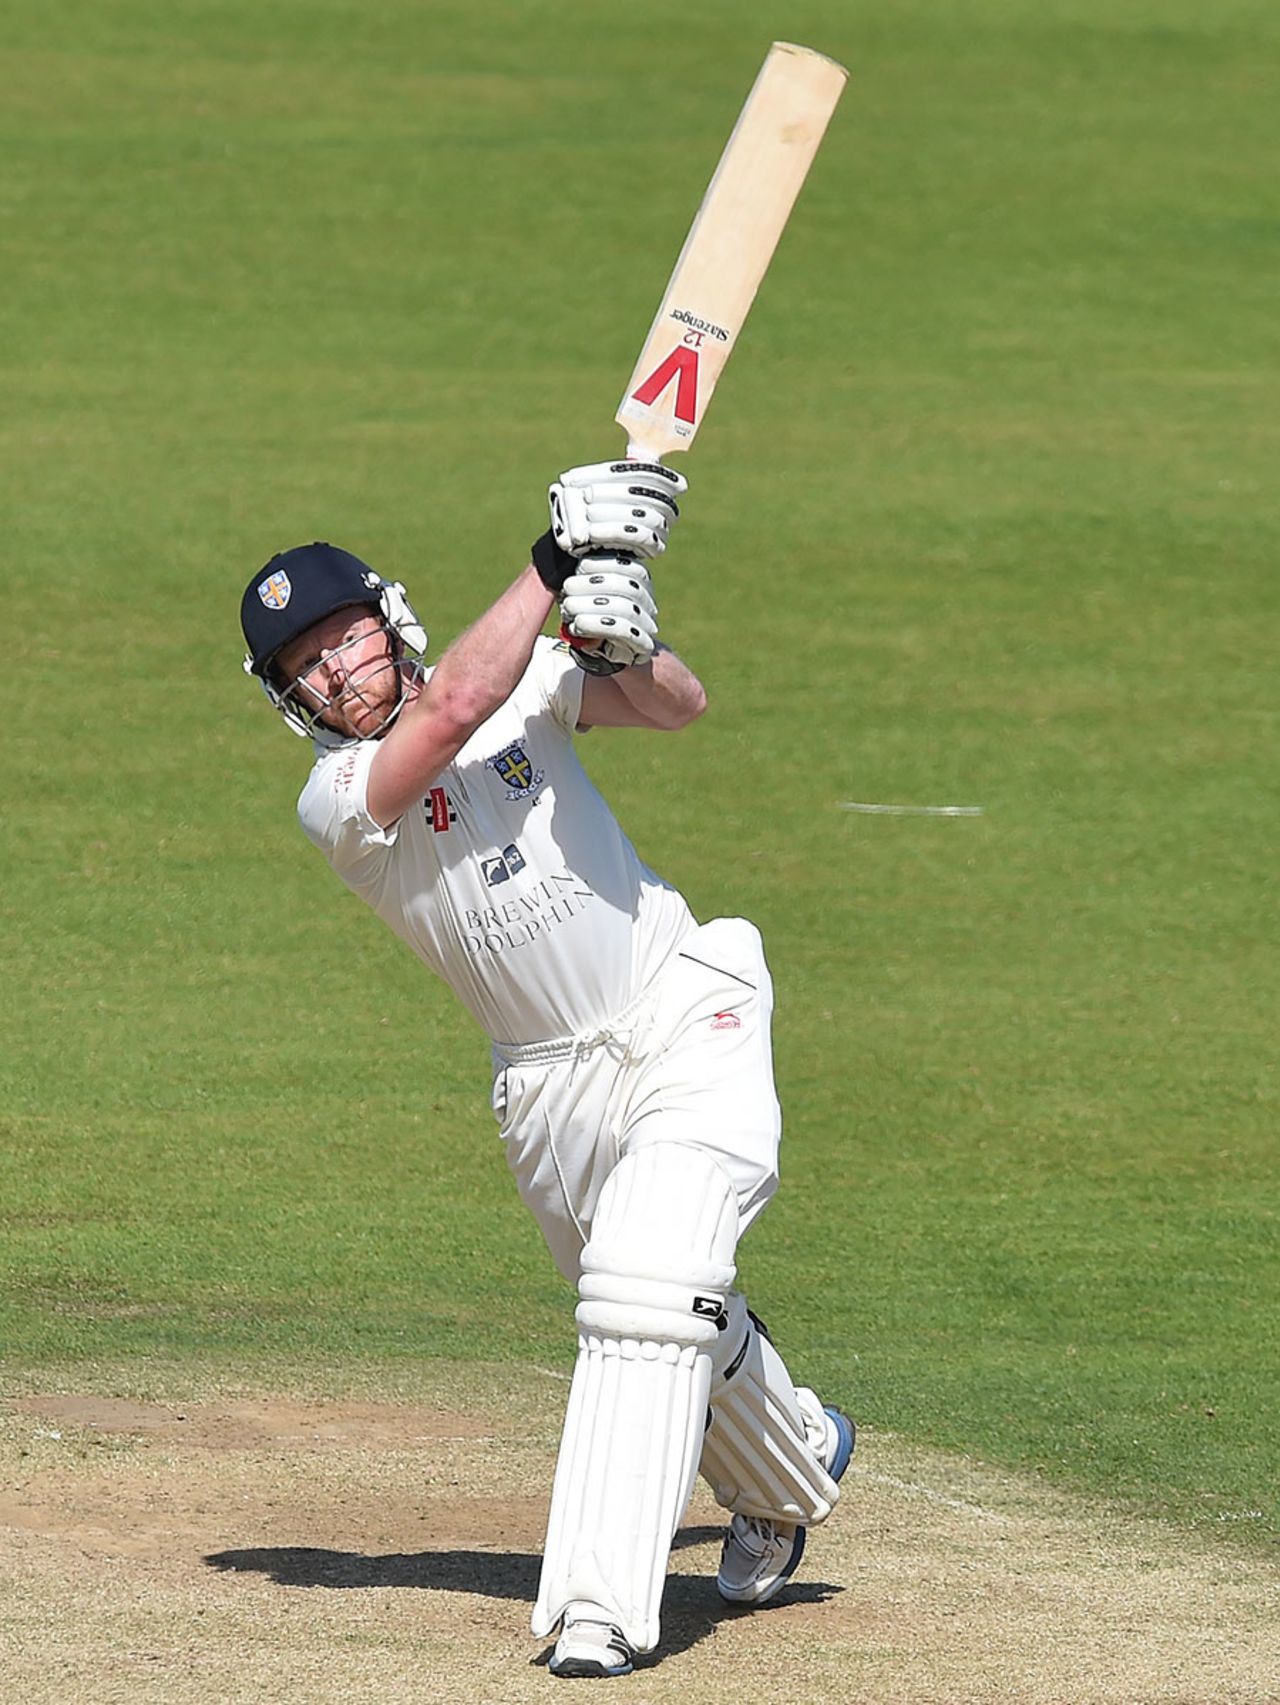 Paul Collingwood drives en route to a vital century, Durham v Nottinghamshire, County Championship Division One, Chester-le-Street, 3rd day, September 2, 2014